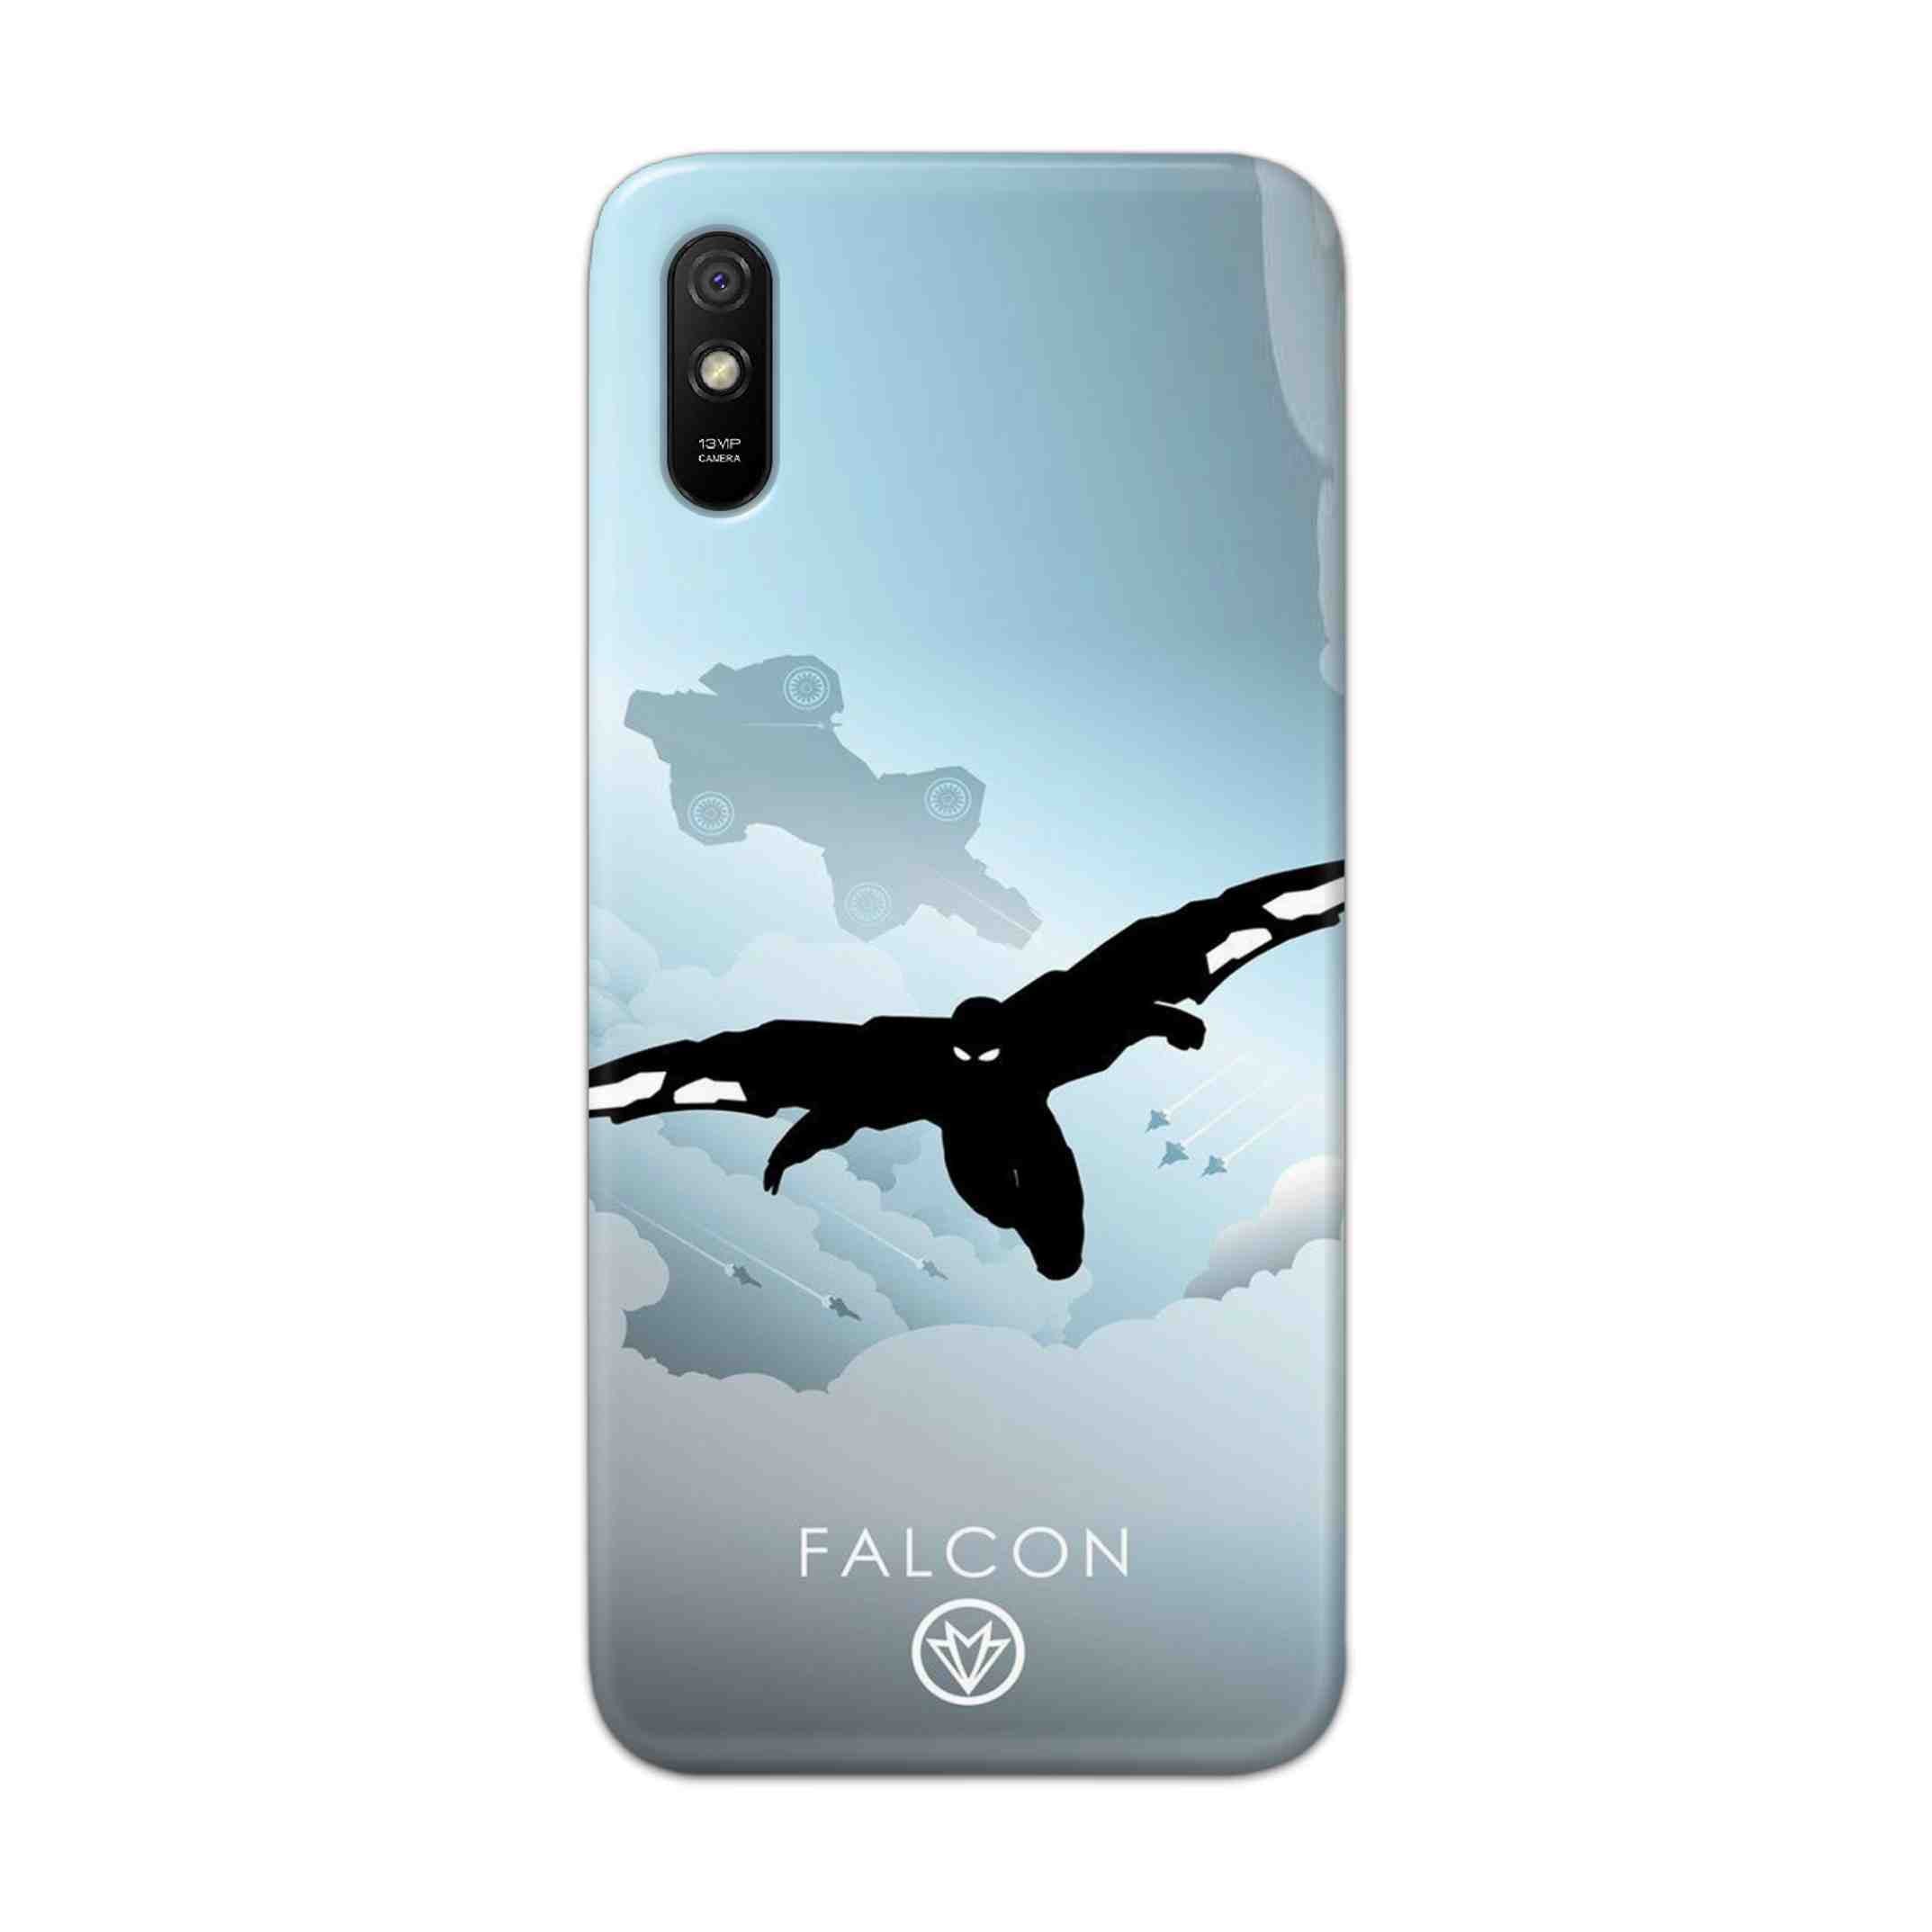 Buy Falcon Hard Back Mobile Phone Case Cover For Redmi 9A Online